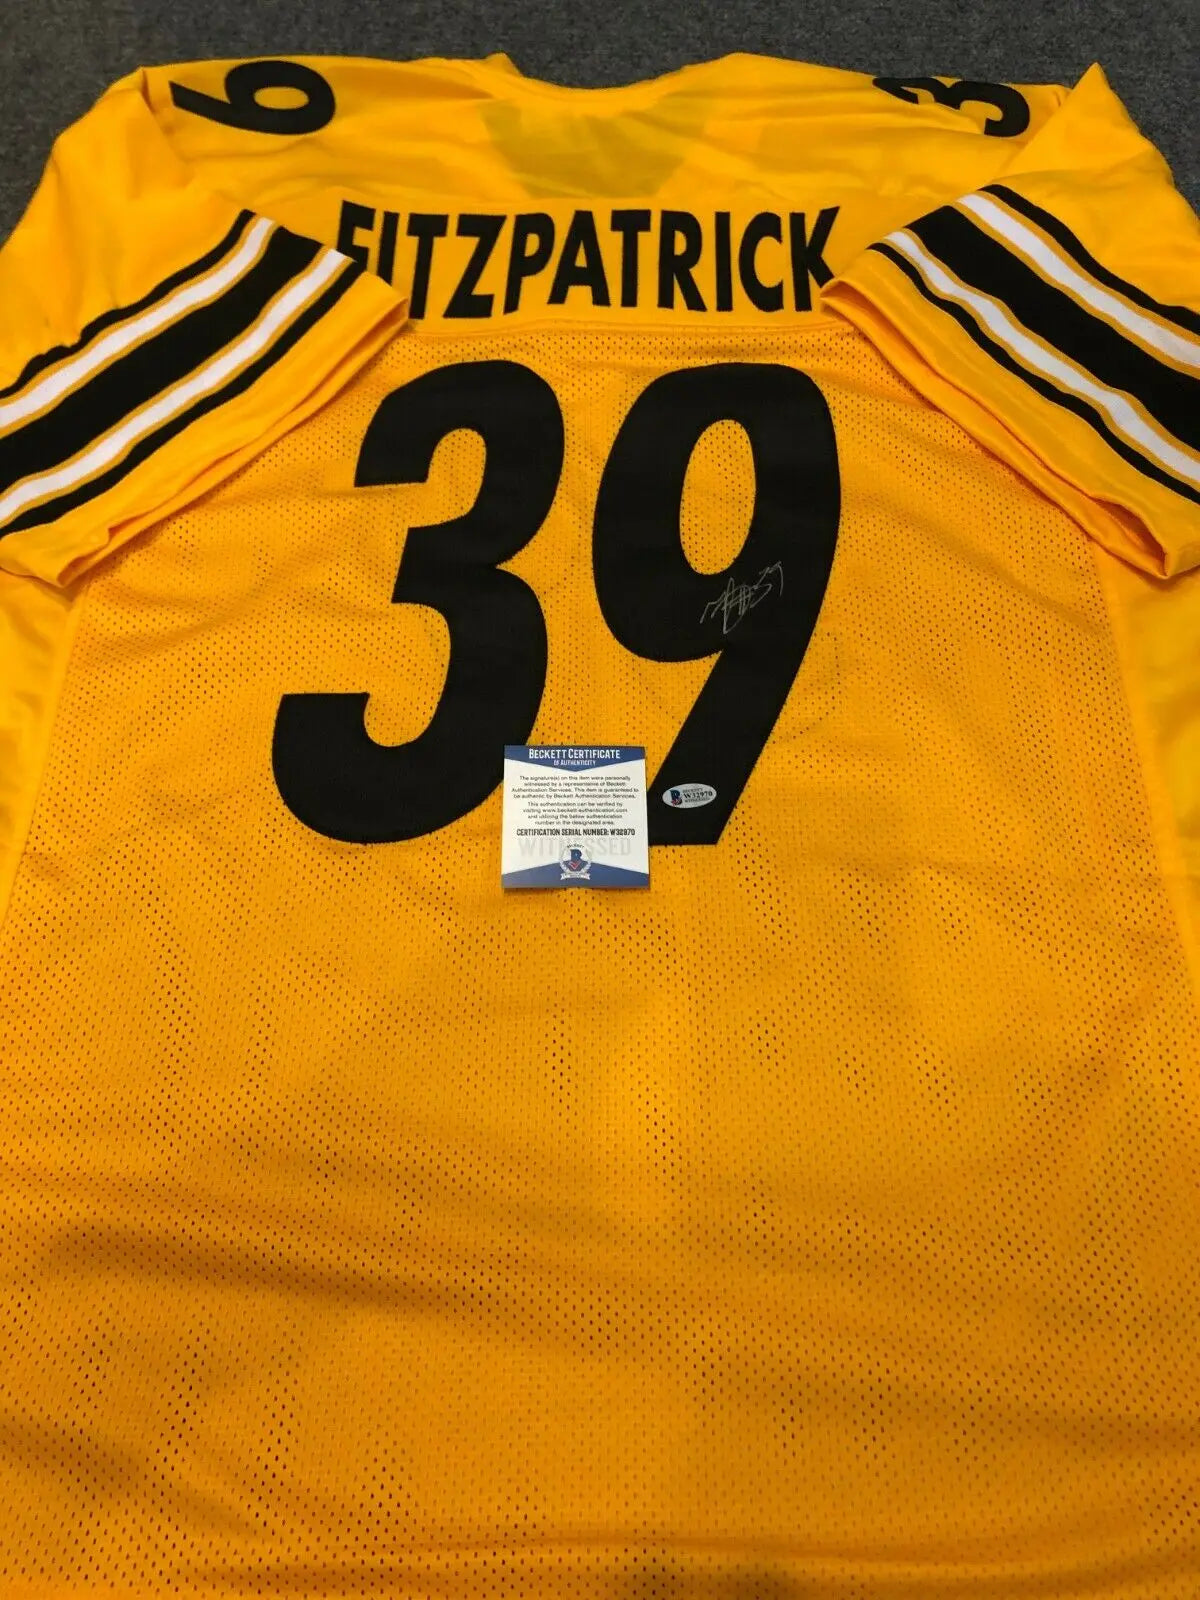 Pittsburgh Steelers Minkah Fitzpatrick Autographed Signed Jersey Beckett Coa